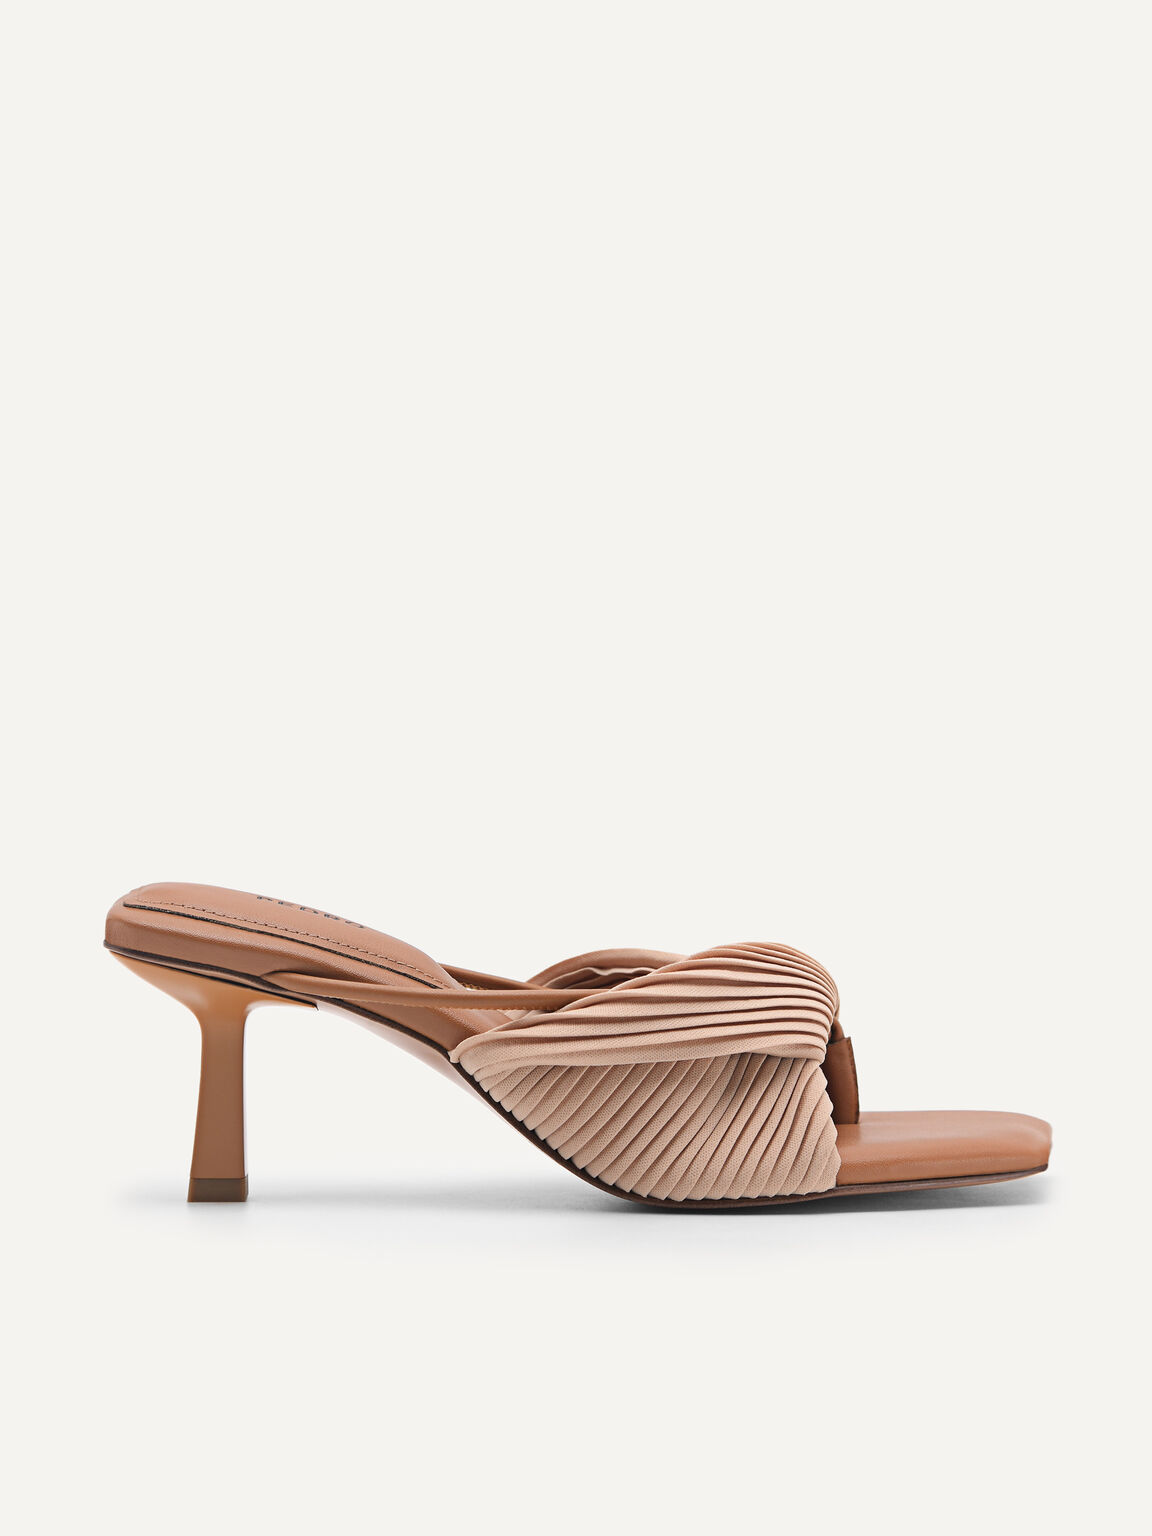 rePEDRO Pleated Heeled Sandals, Nude, hi-res